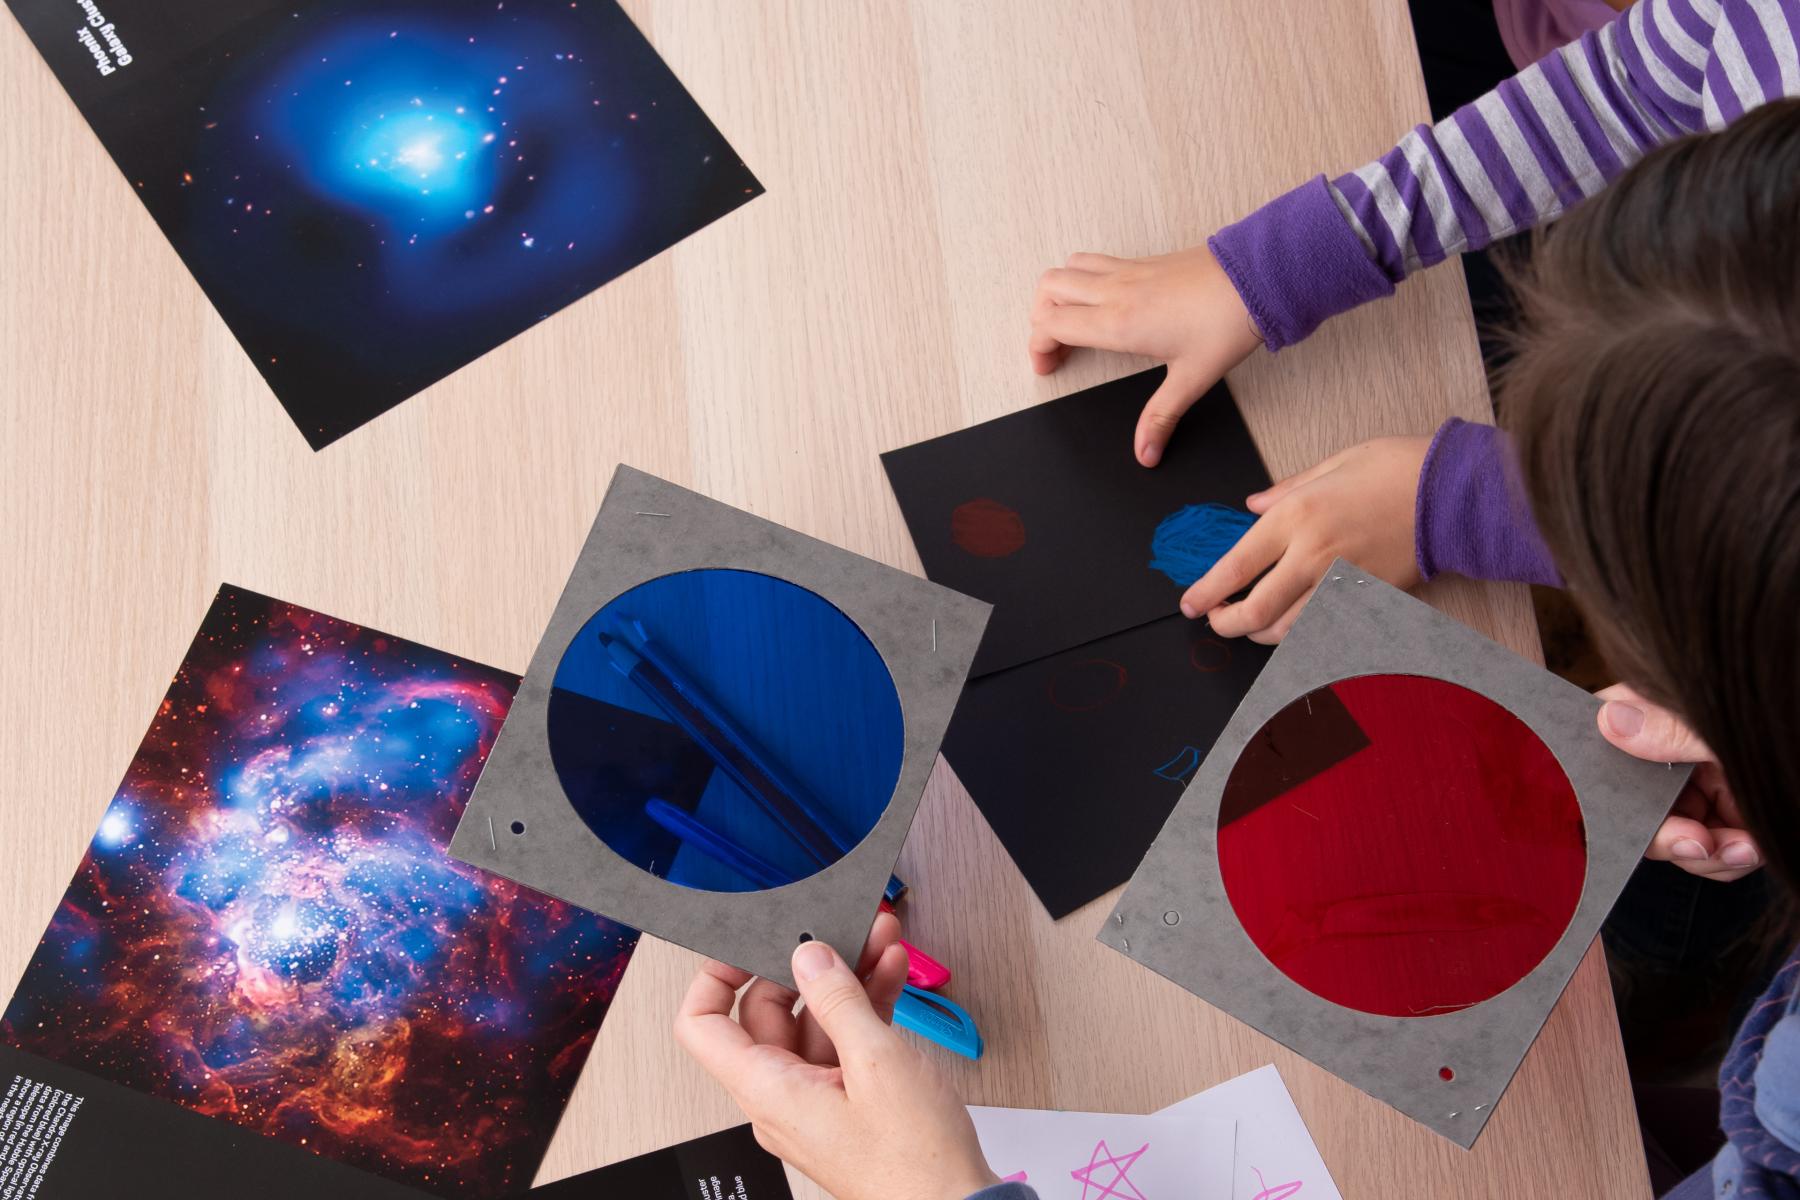 Group of learners use blue and red filters to examine photos of different nebula